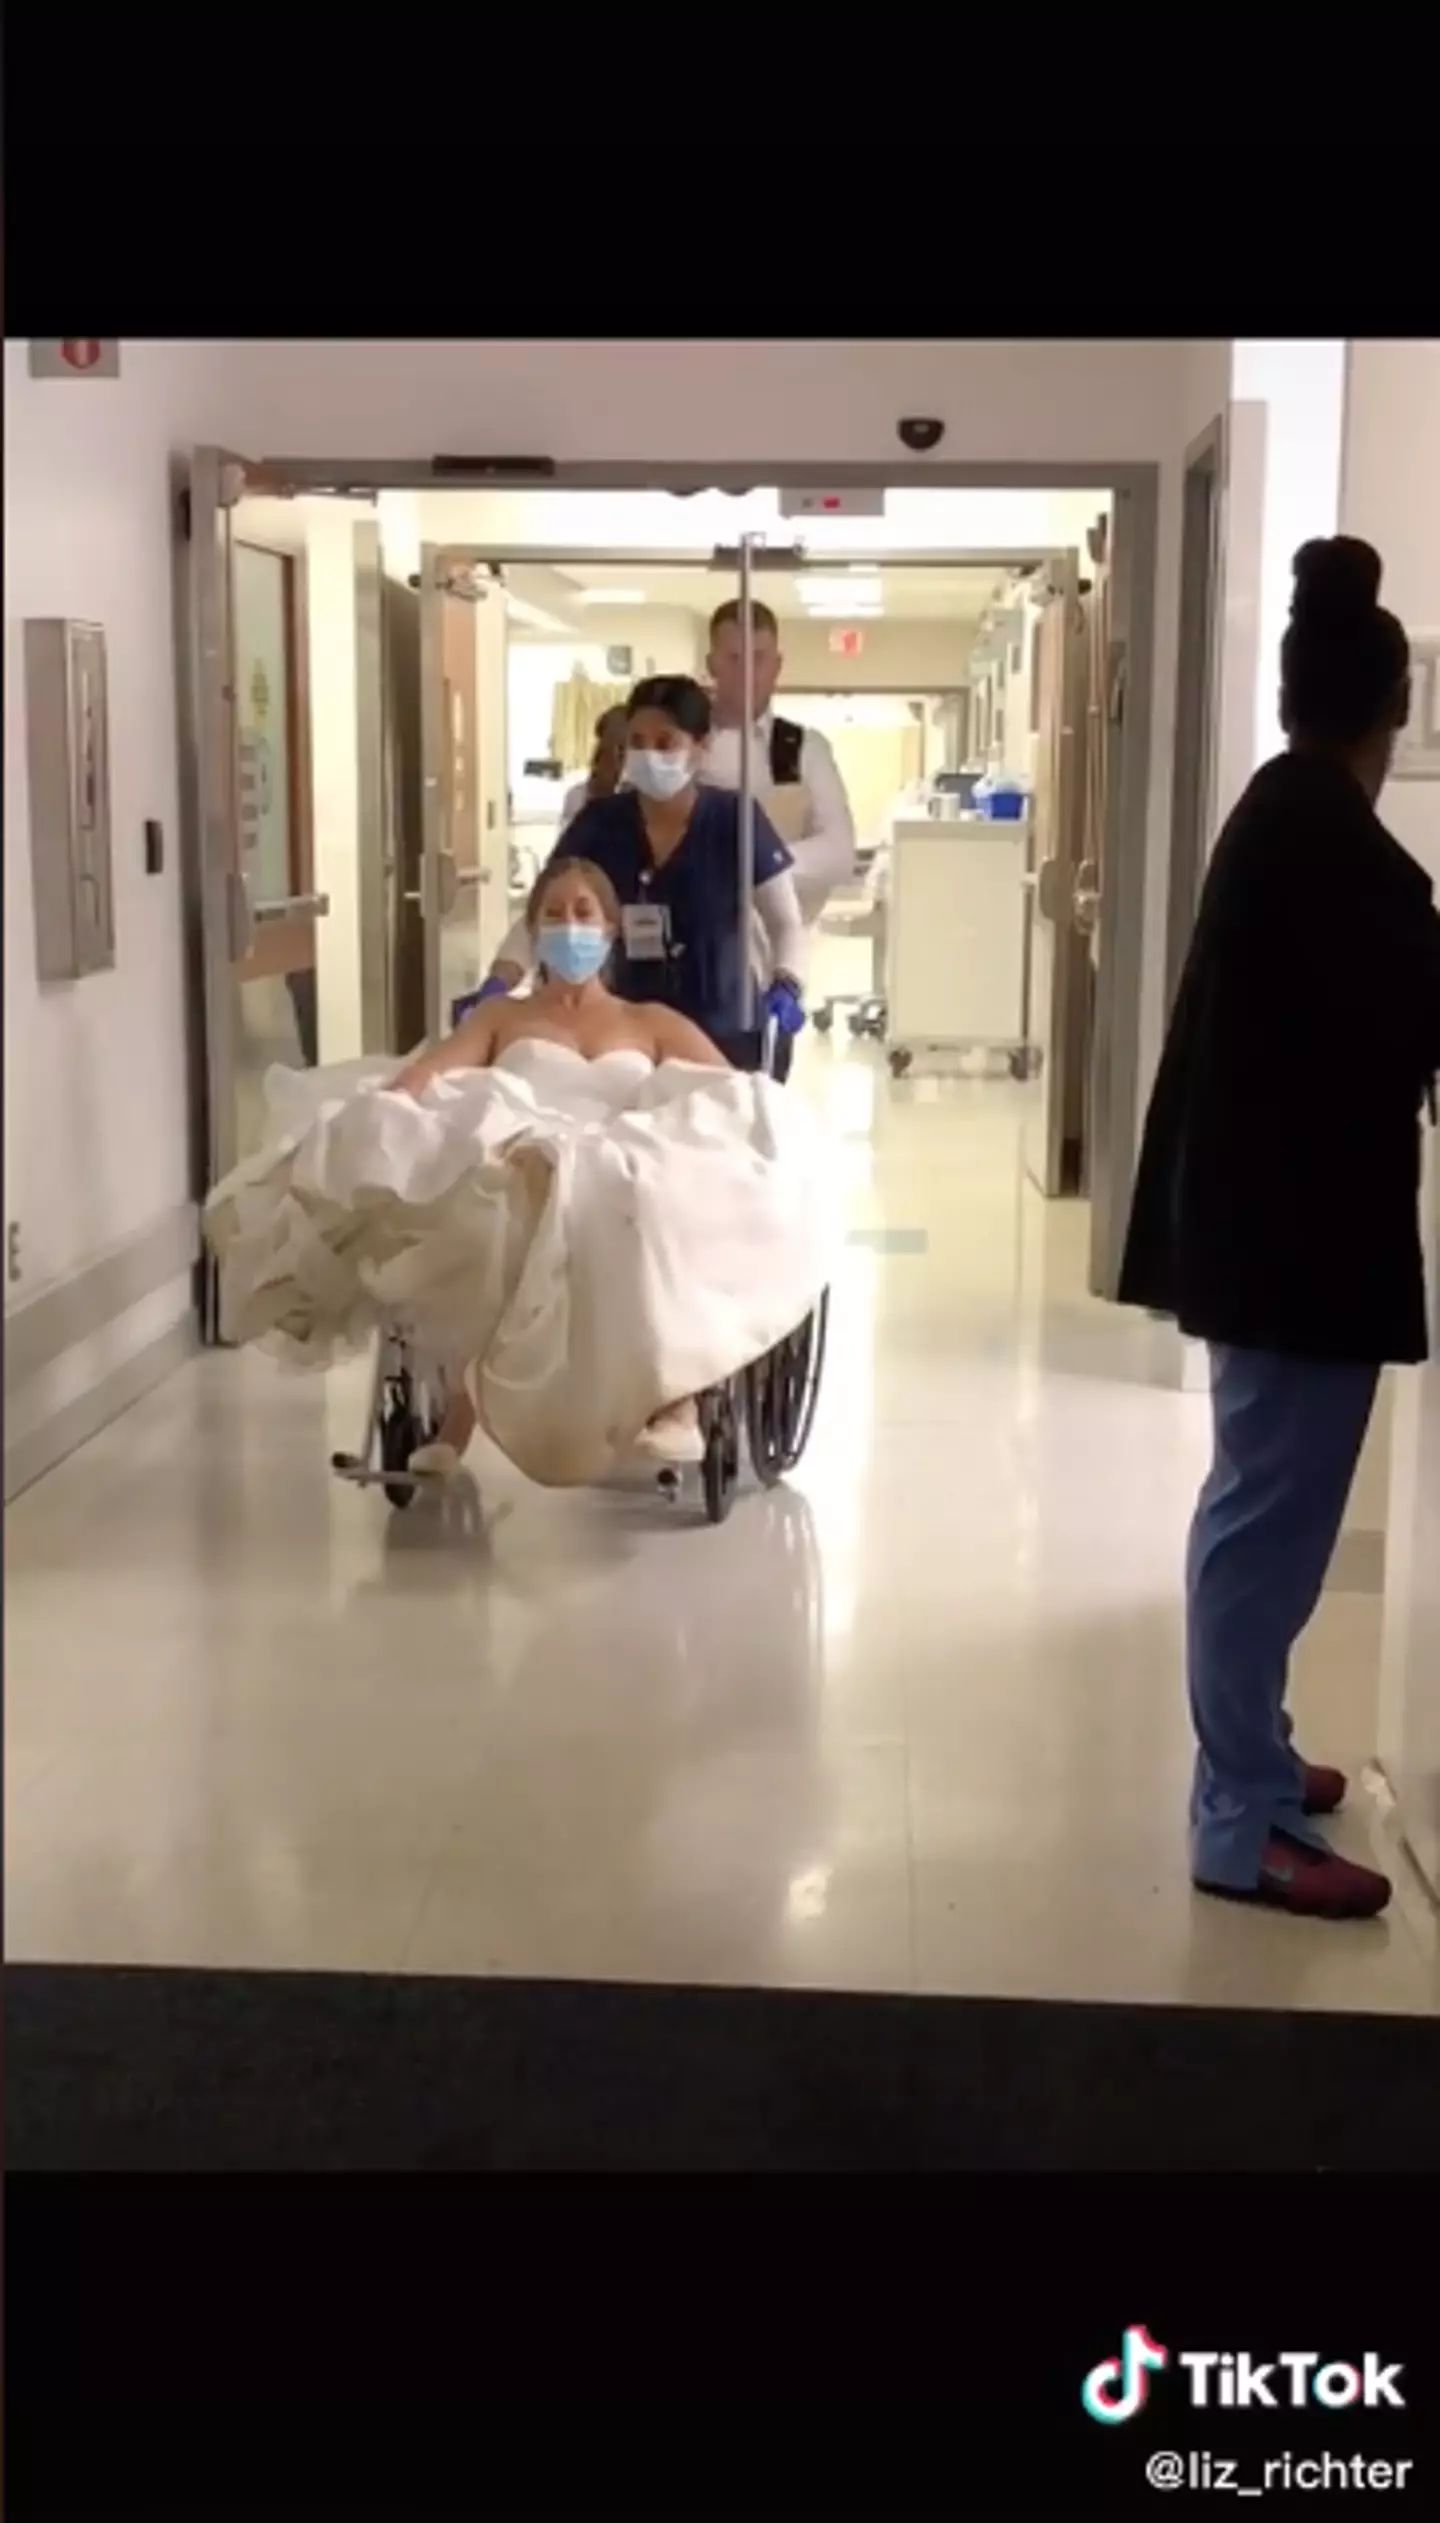 The bride was treated at hospital (